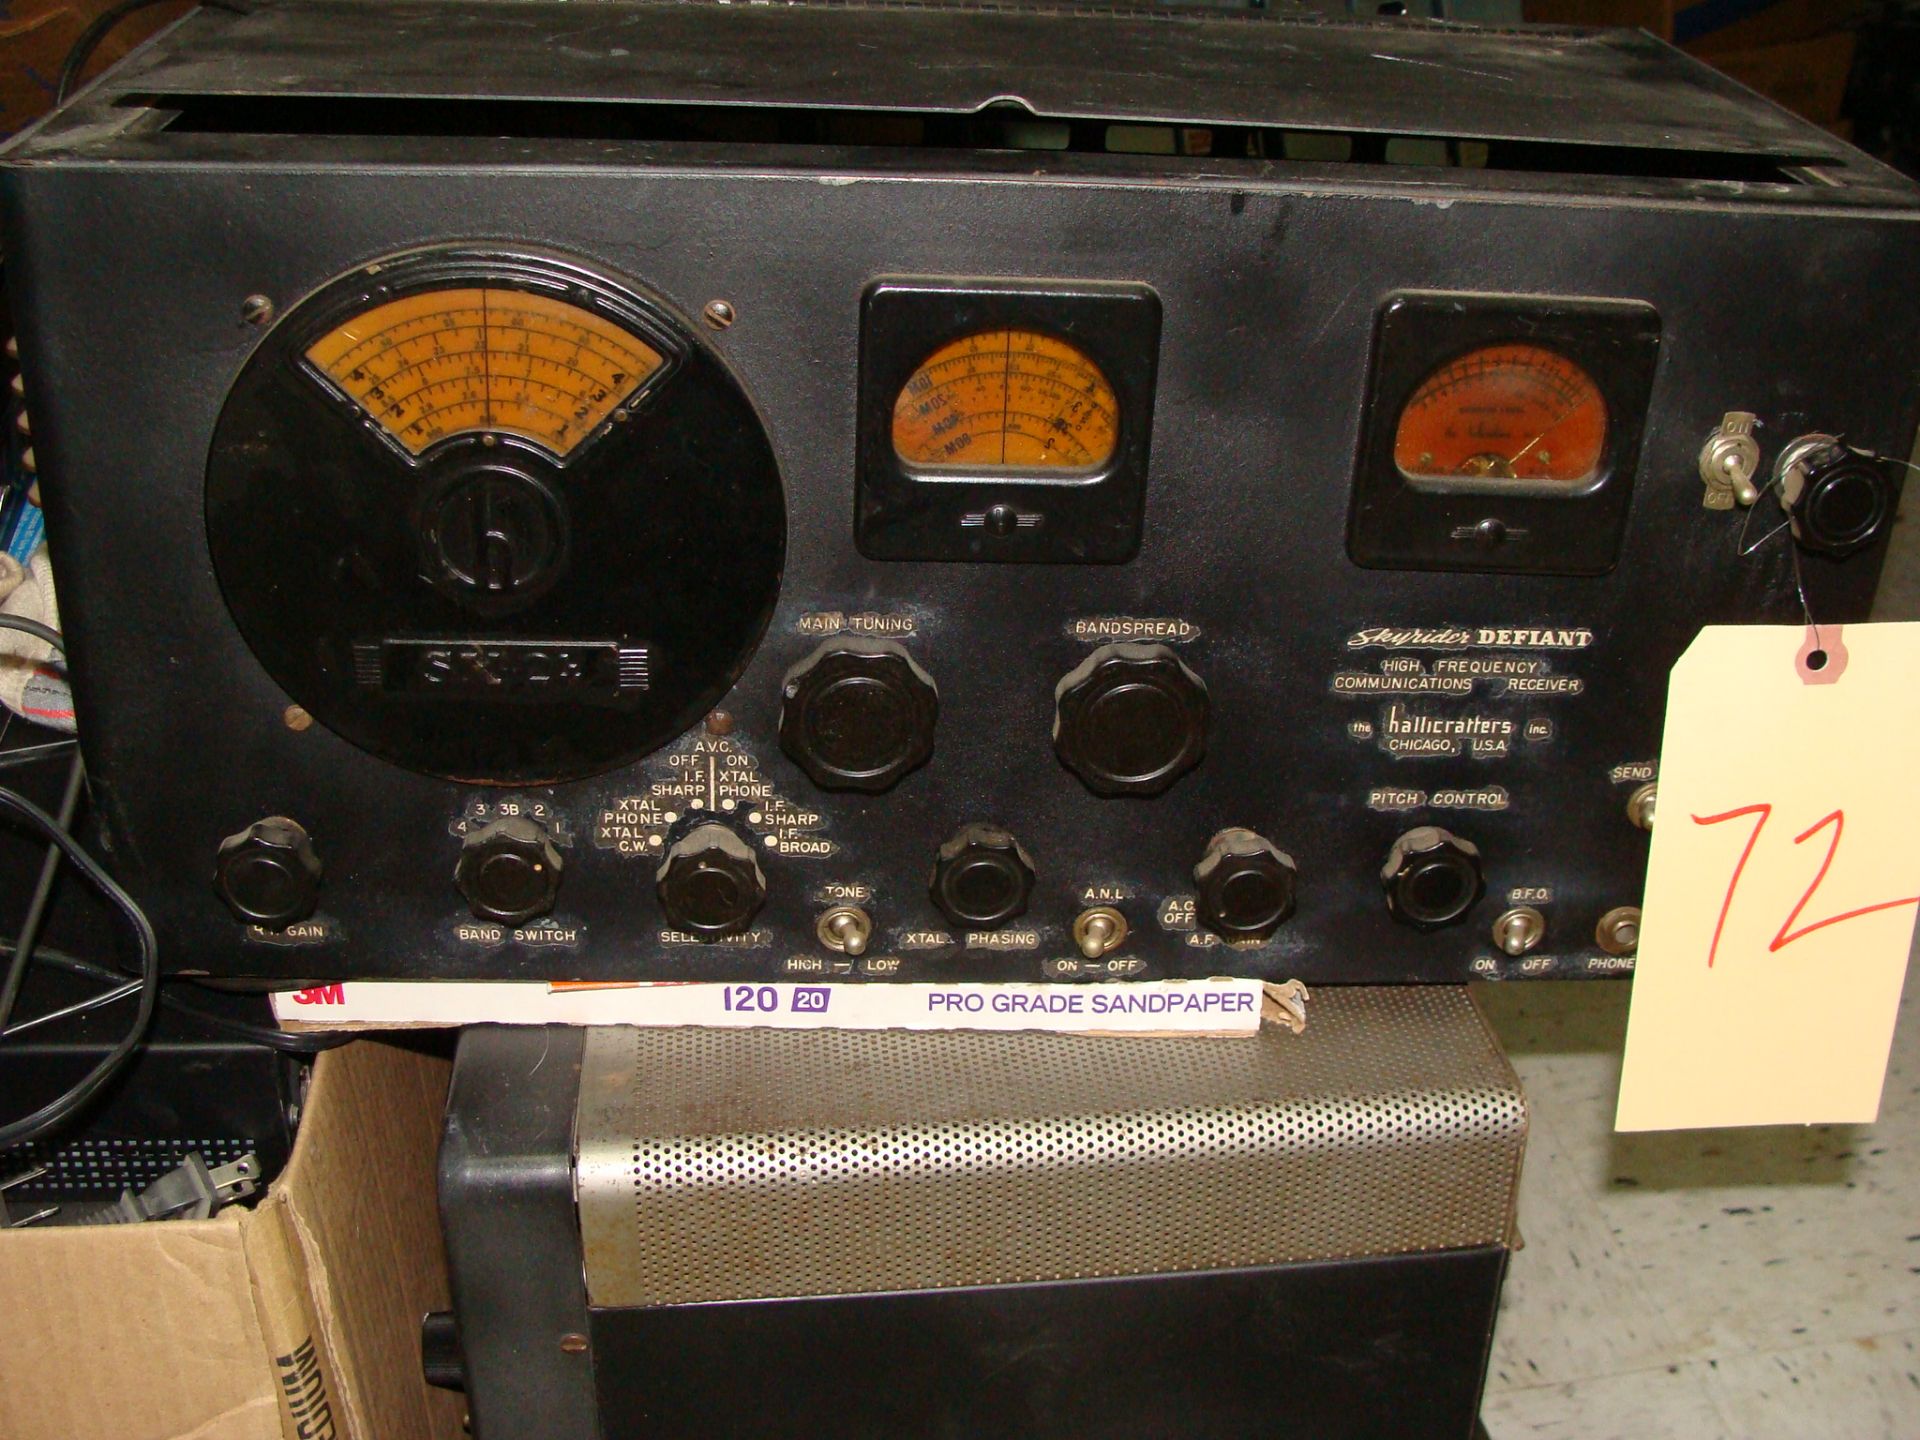 Skyrider Defiant Hi Frequency Communications Receiver